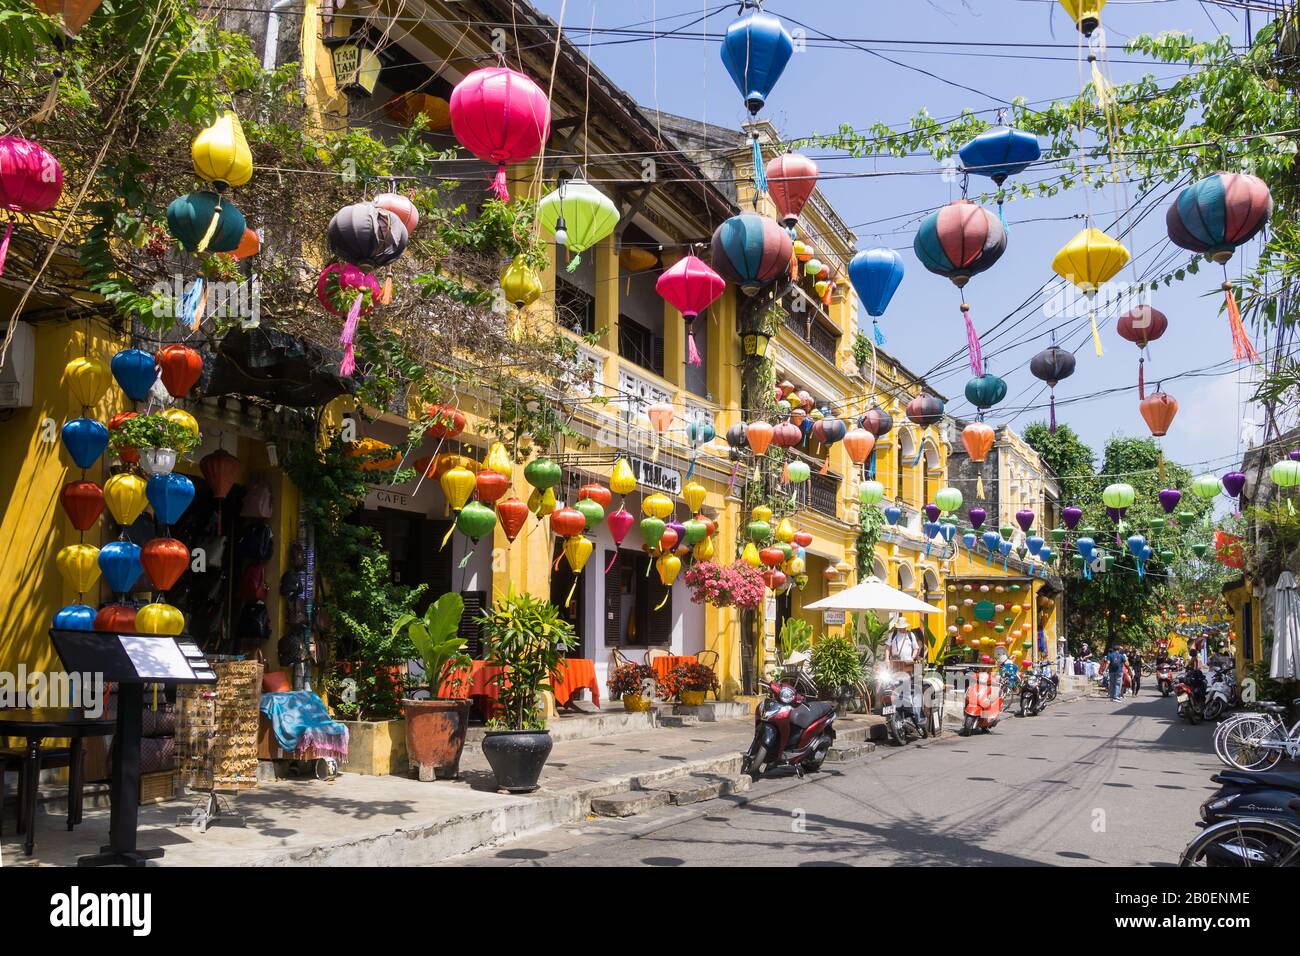 A Travel Guide to Visit Vietnam in October